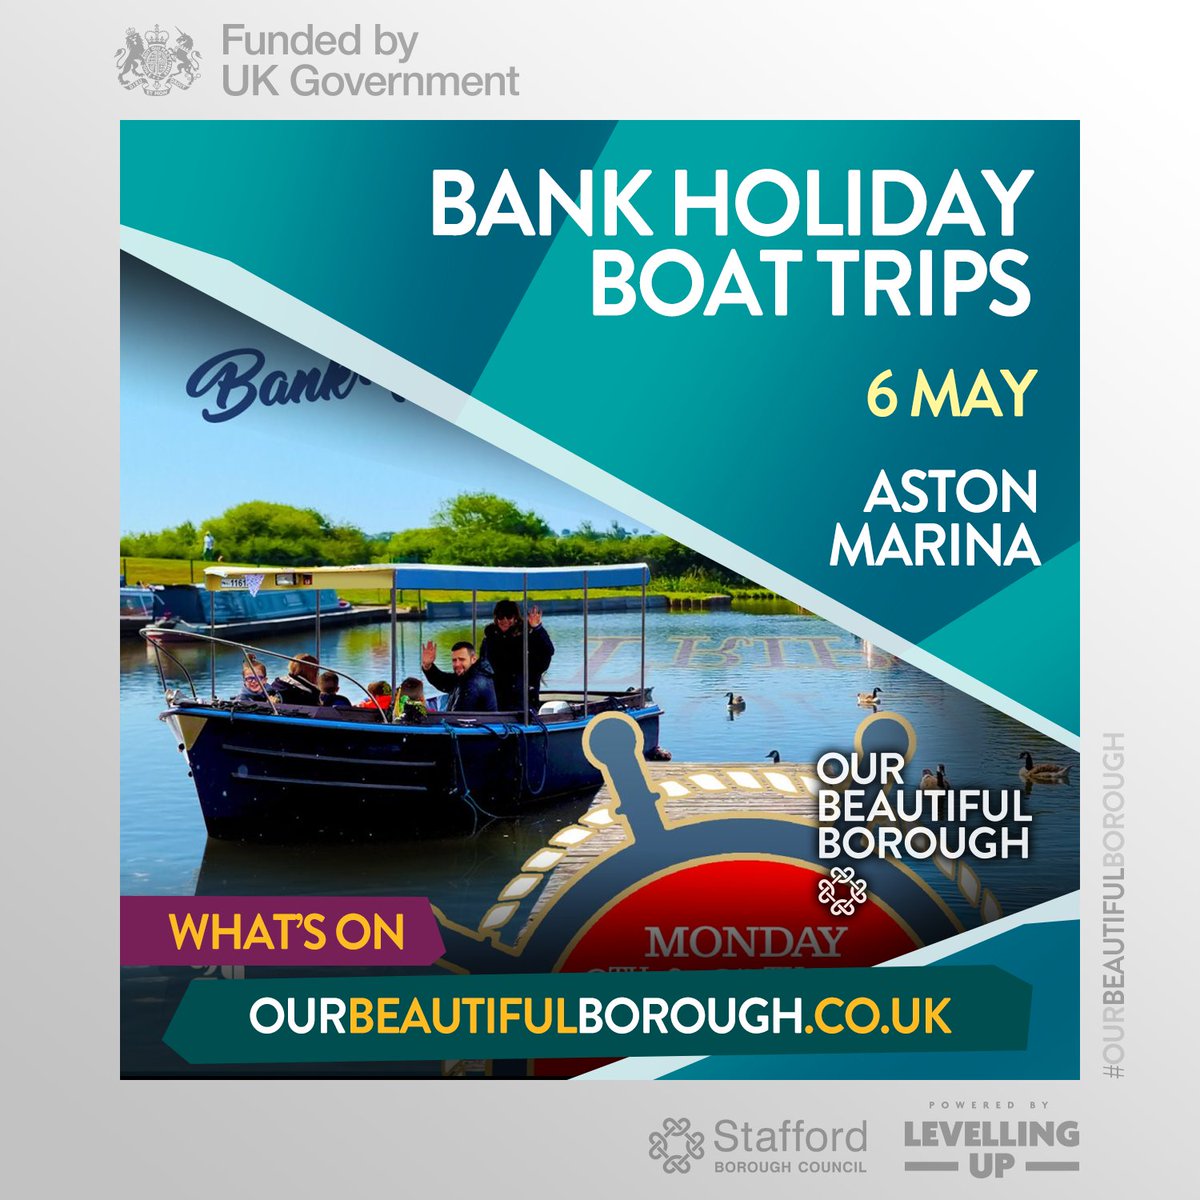 Spend the #EarlyMay #BankHoliday taking in the views at @Aston_Marina on a 10-15 minute boat trip around the marina. Gotta love the tranquil waterways and natural beauty of the Staffordshire countryside! Details: tinyurl.com/47v585wb #DaysOut #FamilyFun #OurBeautifulBorough